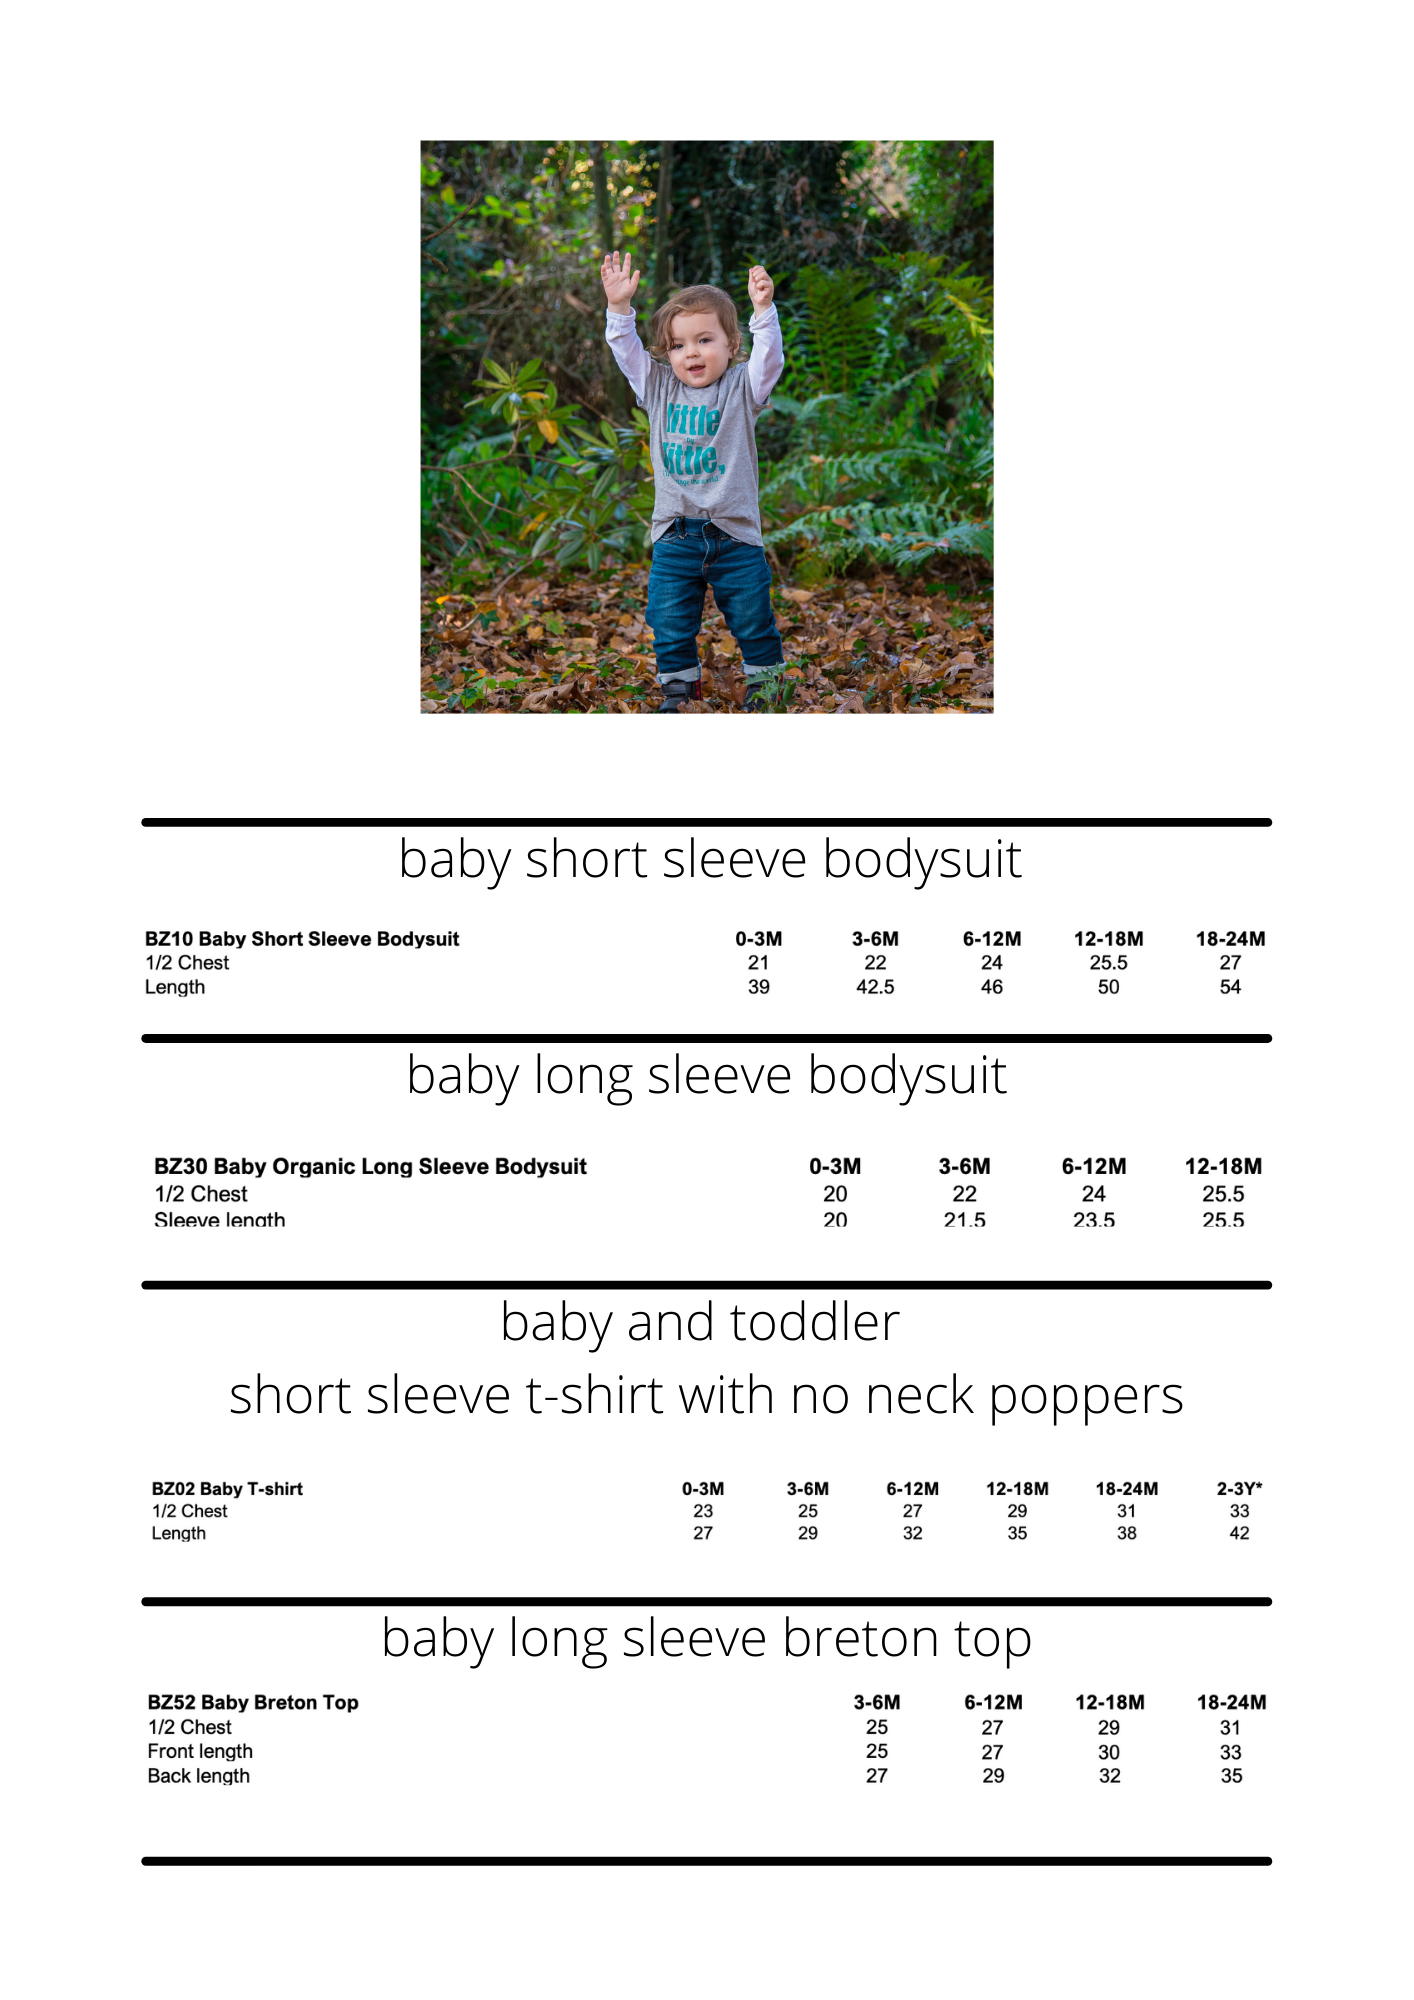 little mate adventures sizing and measurements for baby, toddler, and youth t-shirts, bodysuits, hoodie sweatshirts, sweatshirts, leggings, sweatpants, breton tops